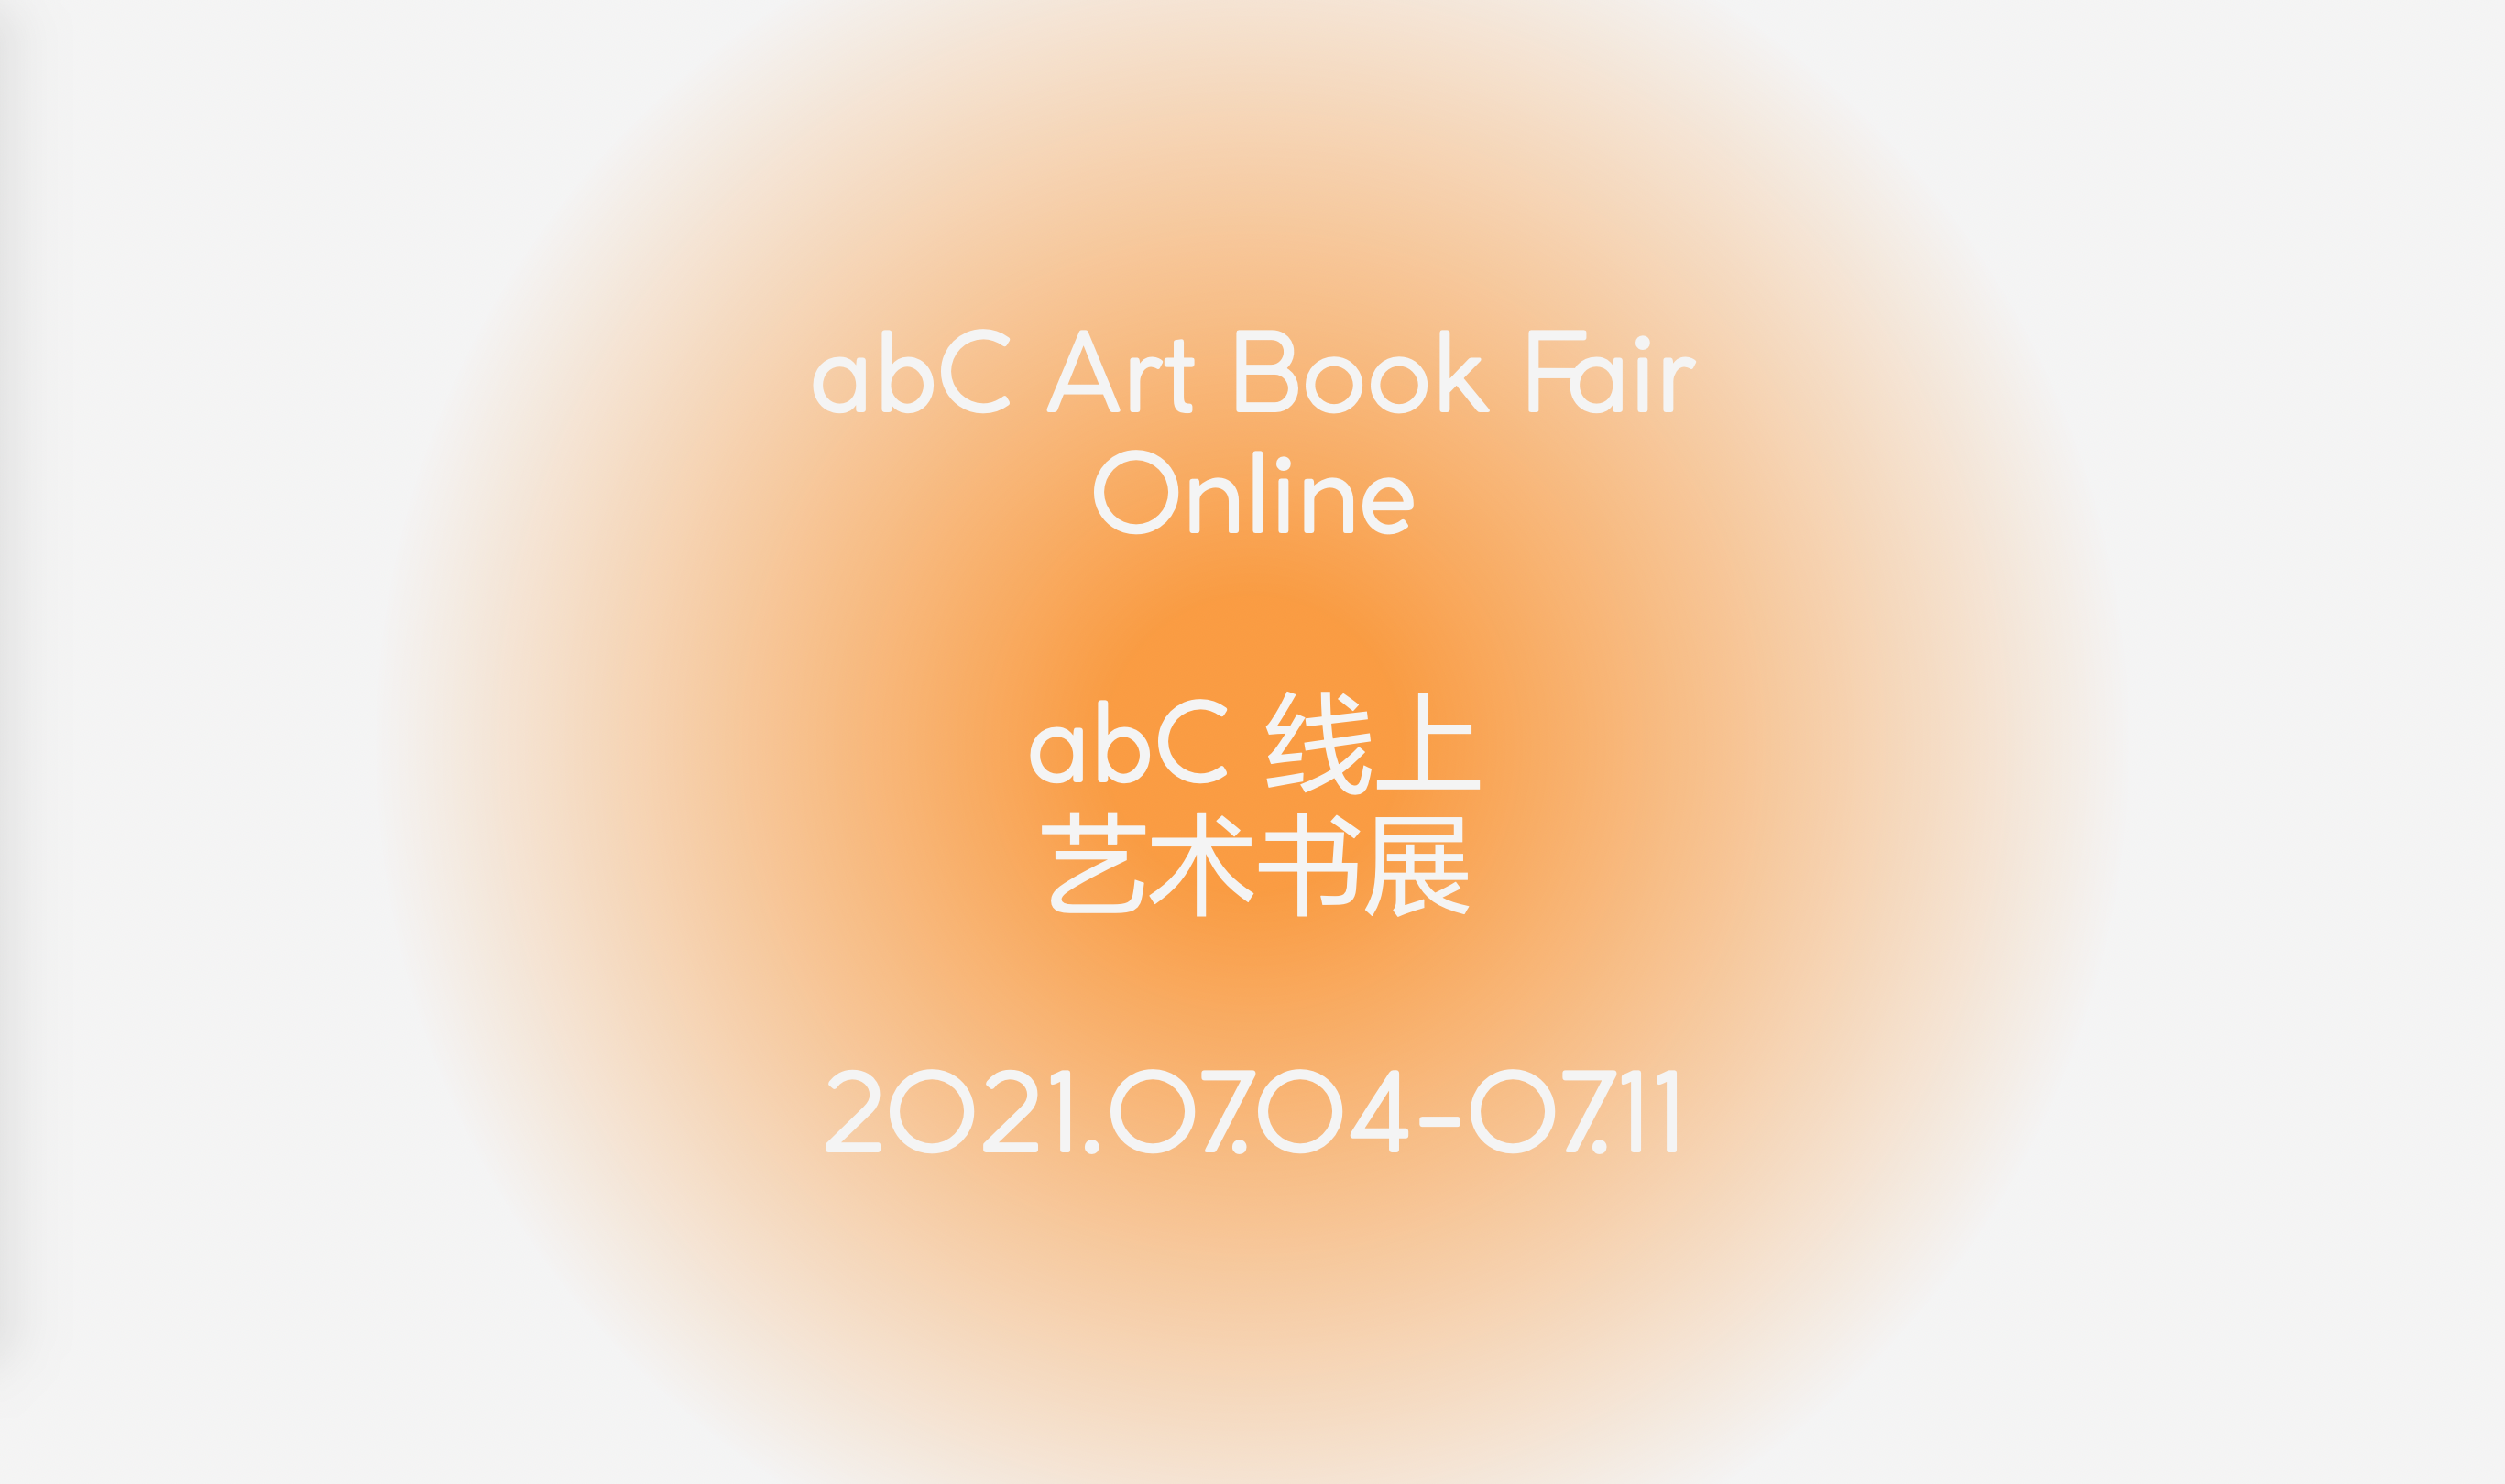 abC Online Art Book Fair will be launched on July 4th 00:00!